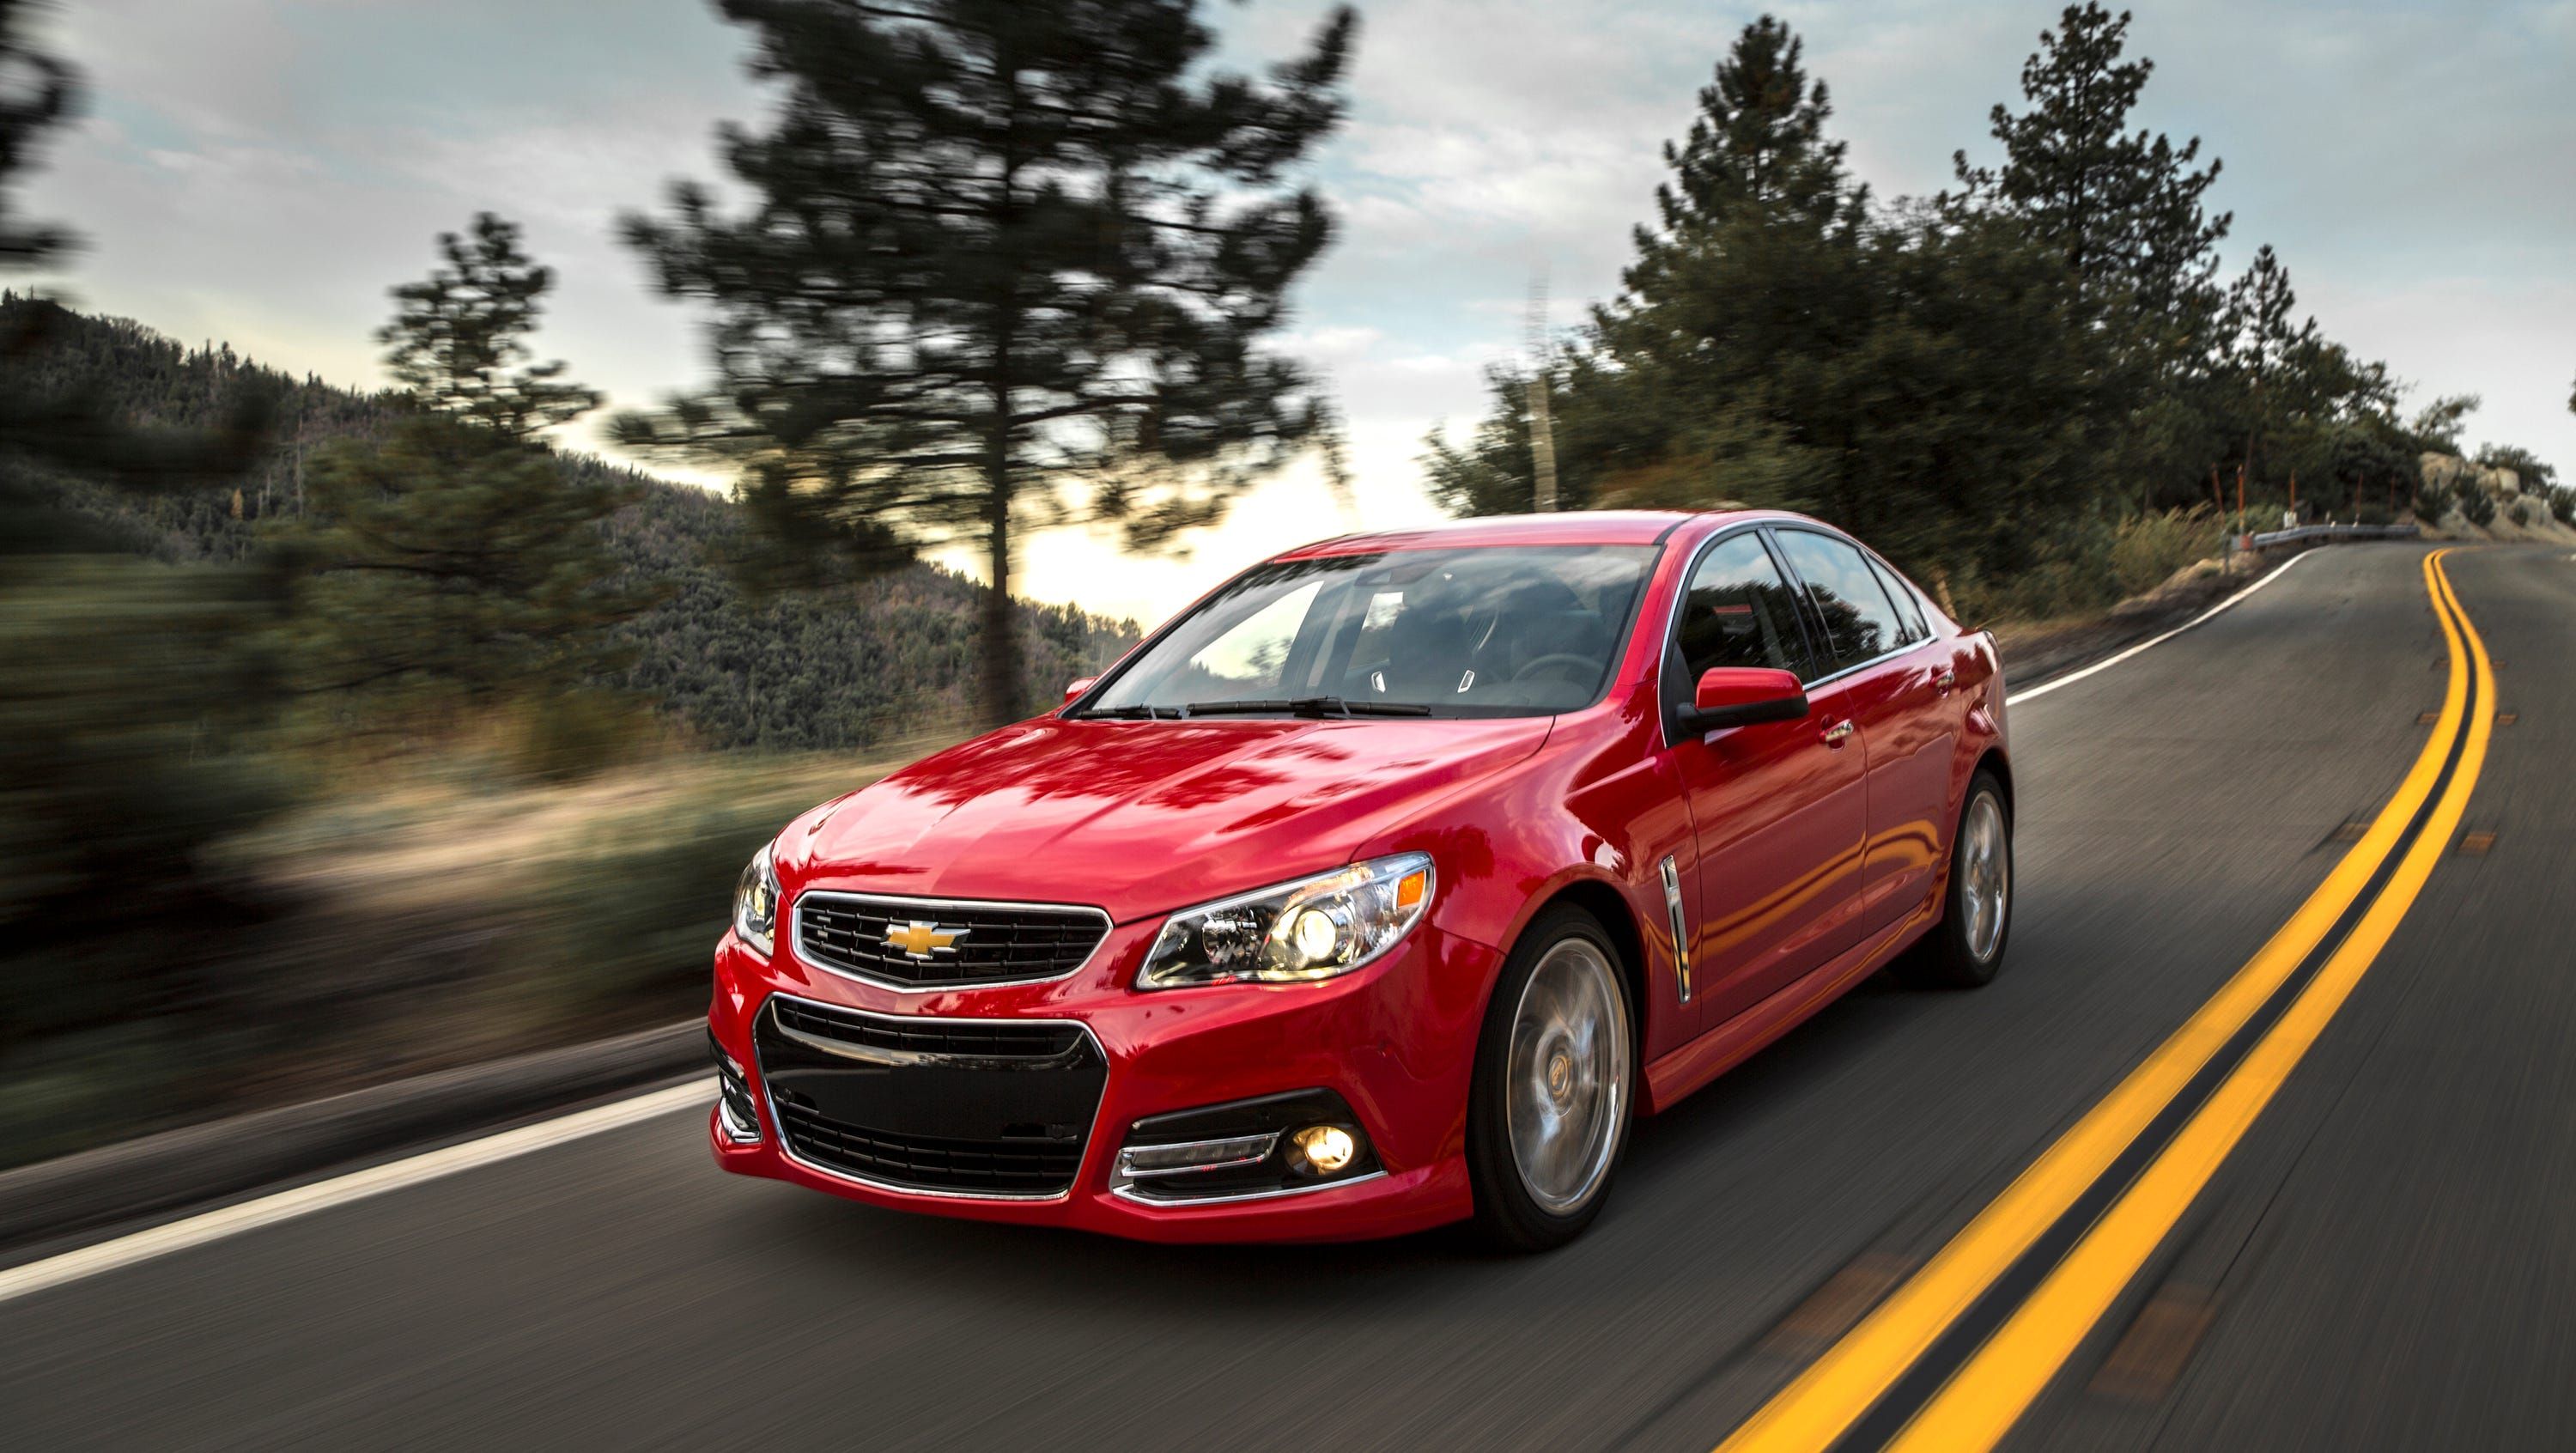 Chevrolet SS - USA Today